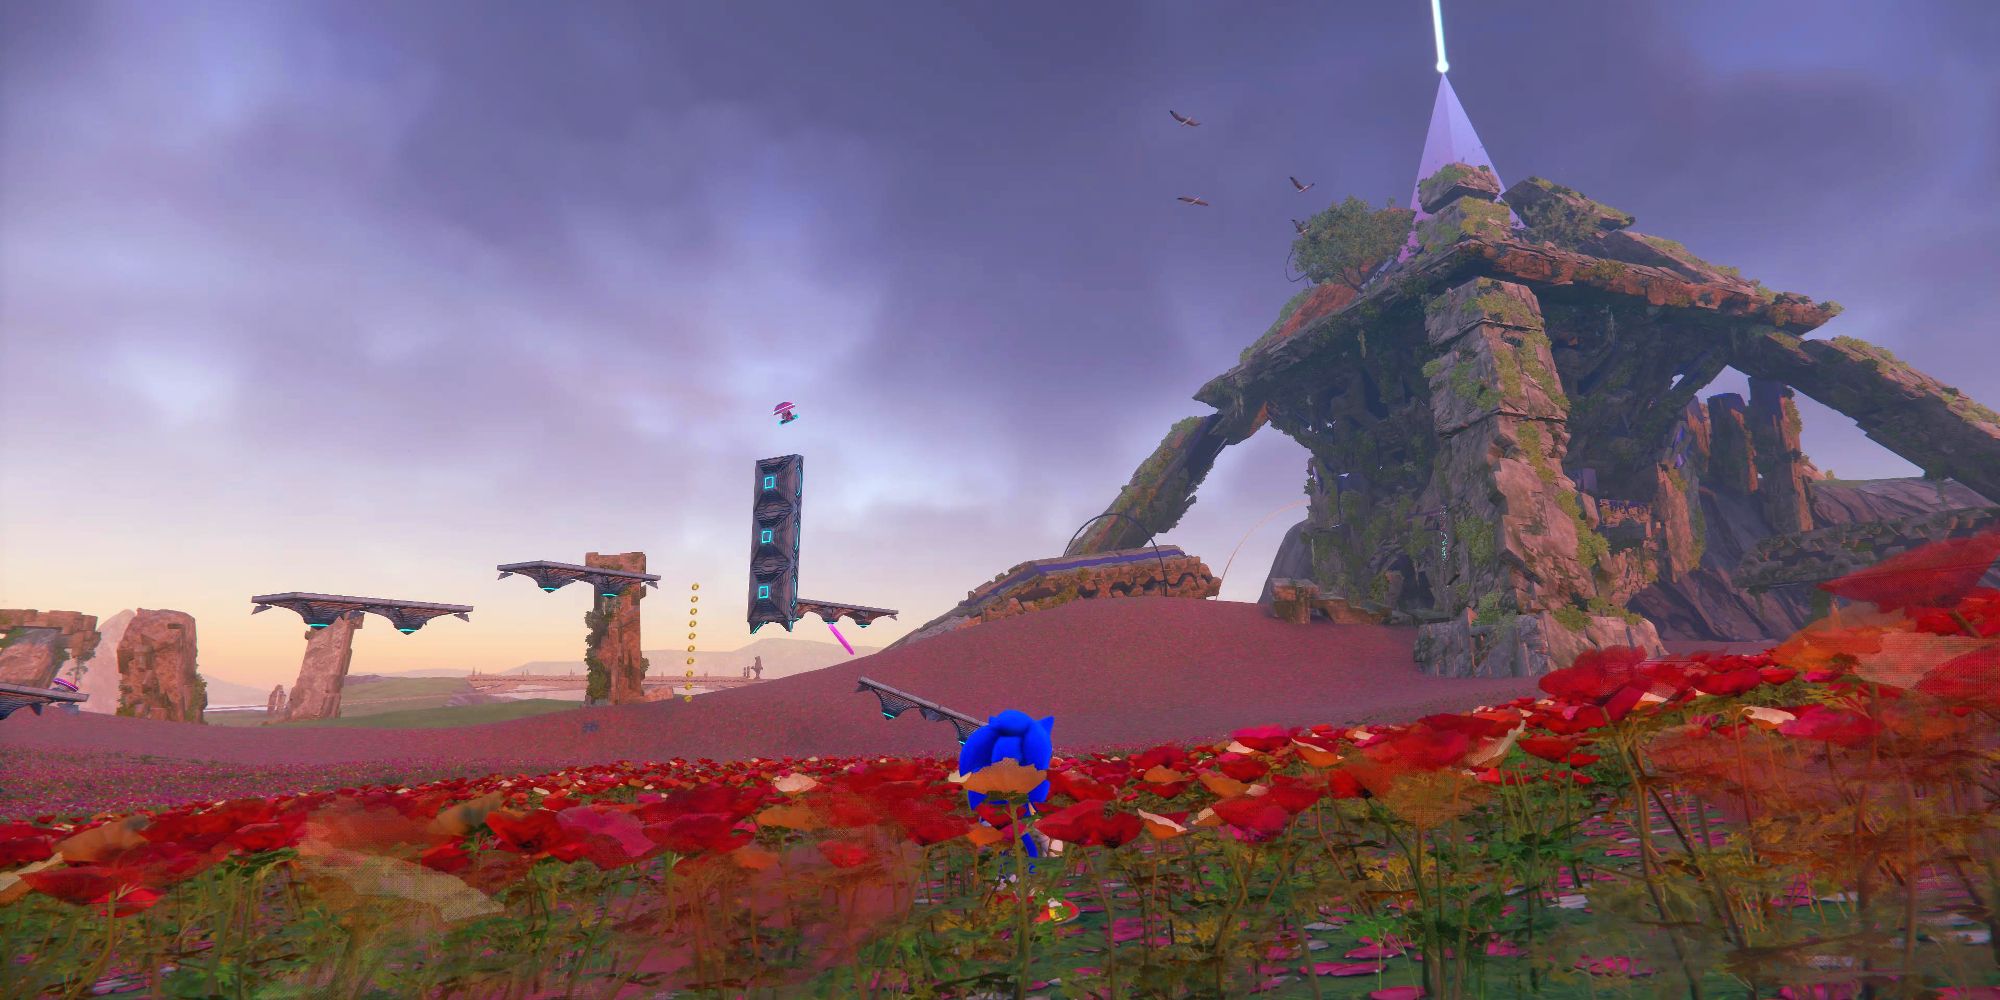 As Sonic approaches a strange ancient pyramid in the distance, he finds himself lost in a vast field of bright red nasturtium blossoms.